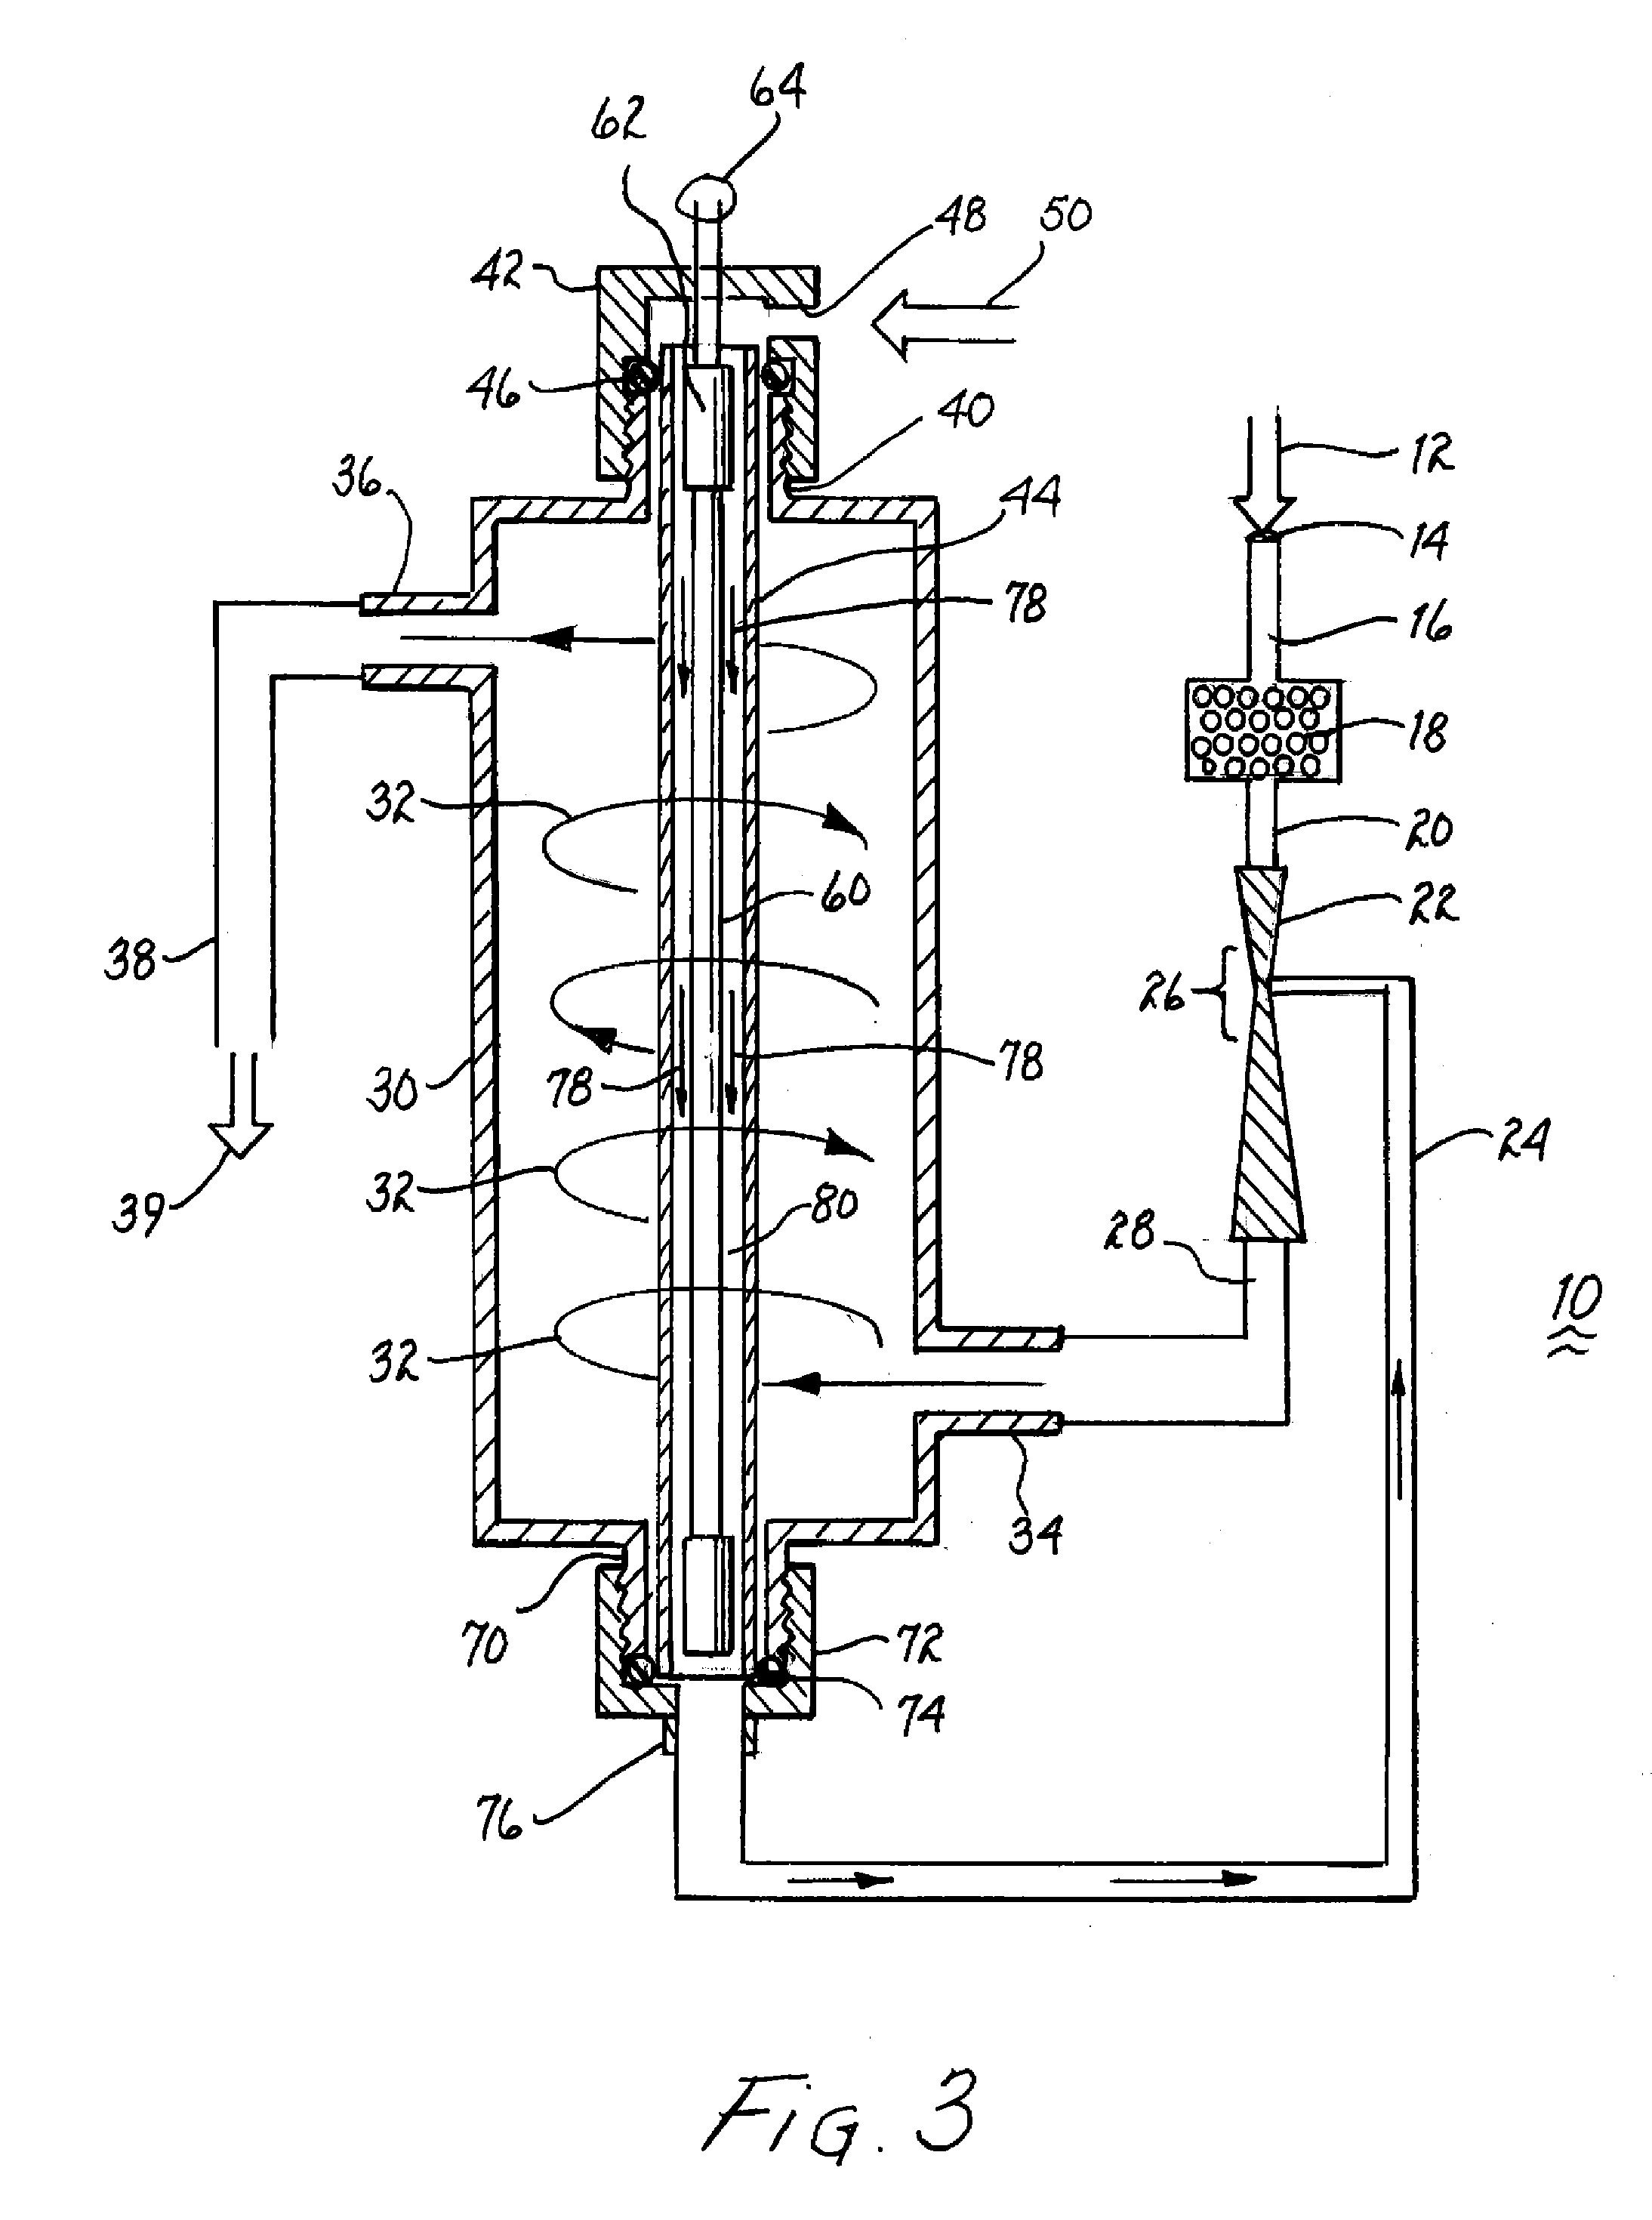 Apparatus and method for preventing biological regrowth in water